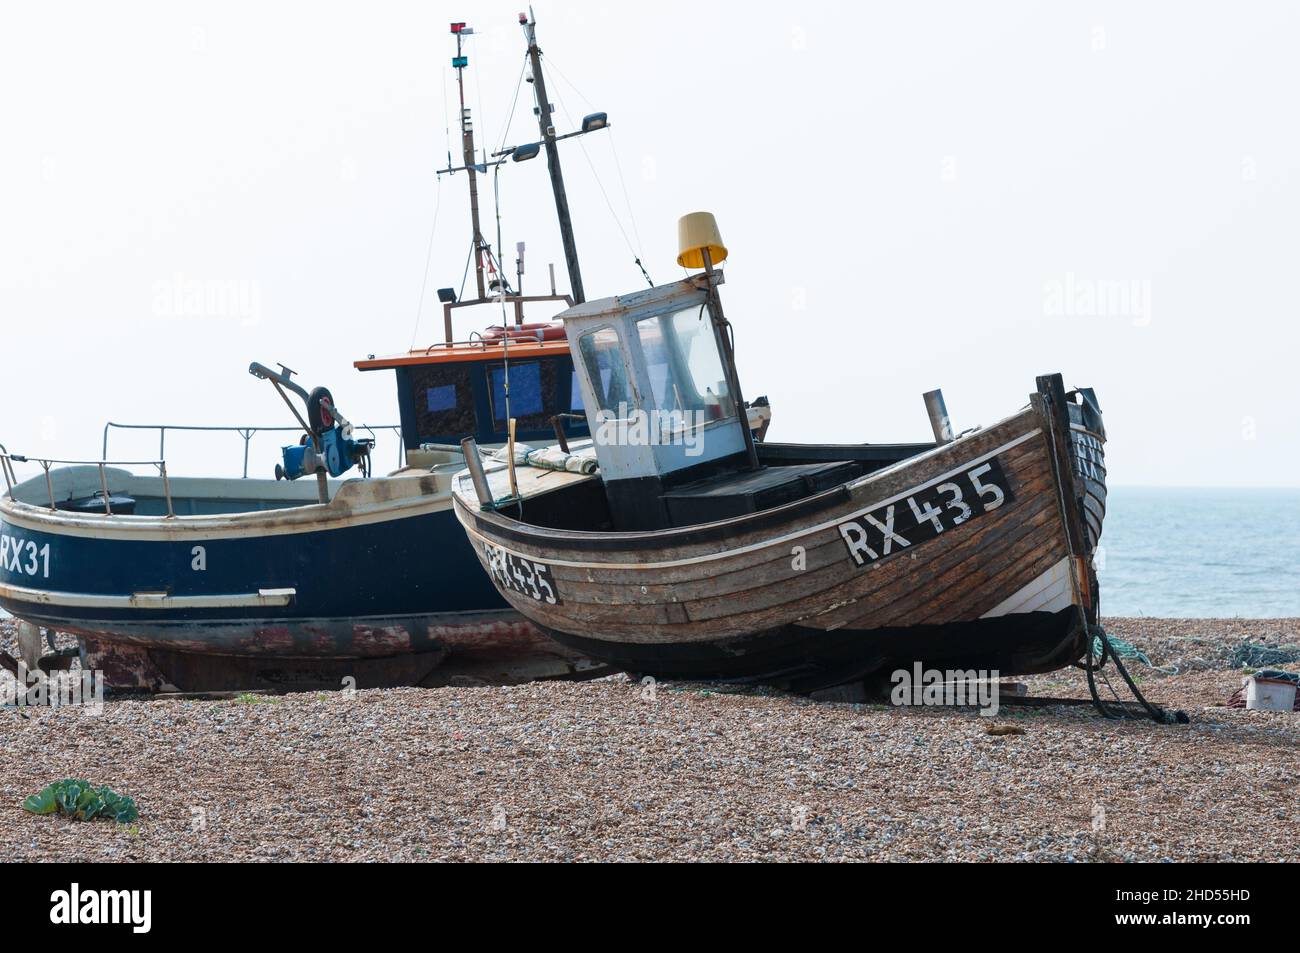 File:Old Fishing Boat at Dungeness - geograph.org.uk - 1069294.jpg